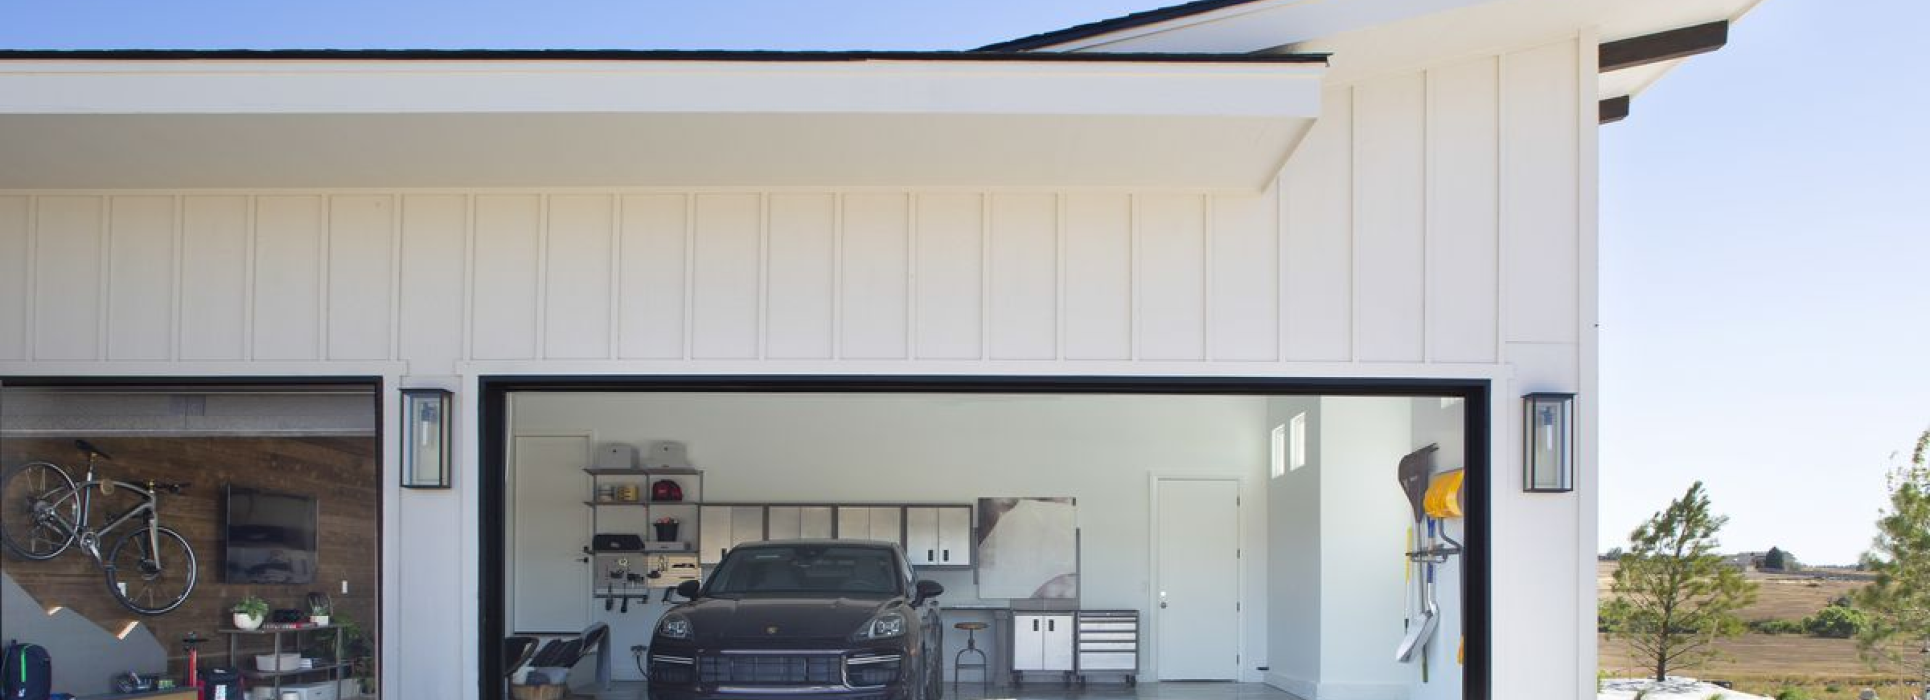 Garage Lighting & Power Upgrades for Safety & Convenience